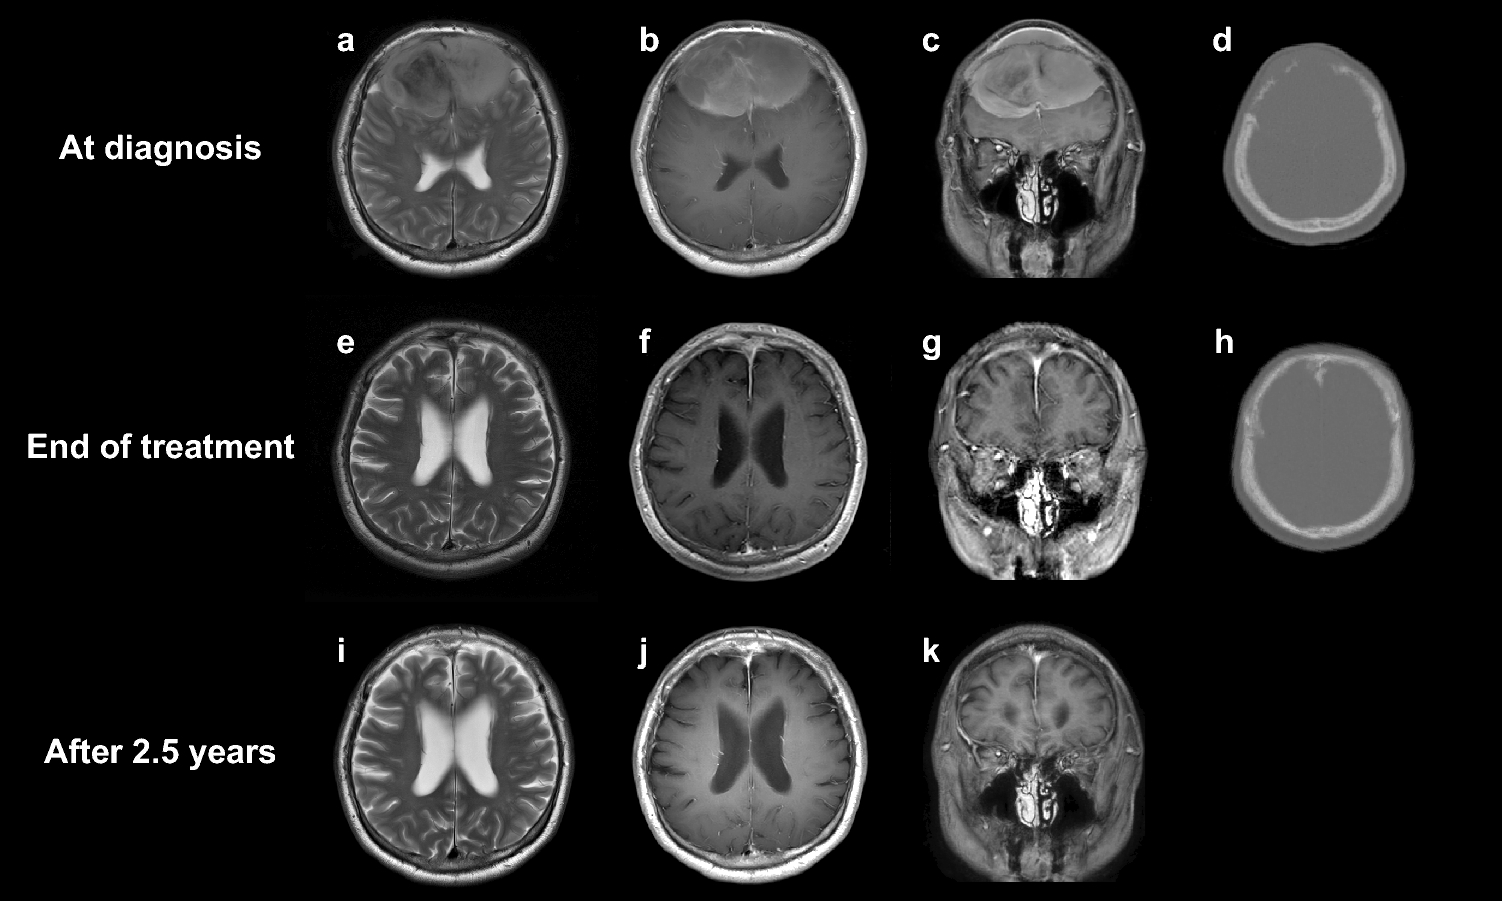 Diffuse large B-cell lymphoma of the skull vault